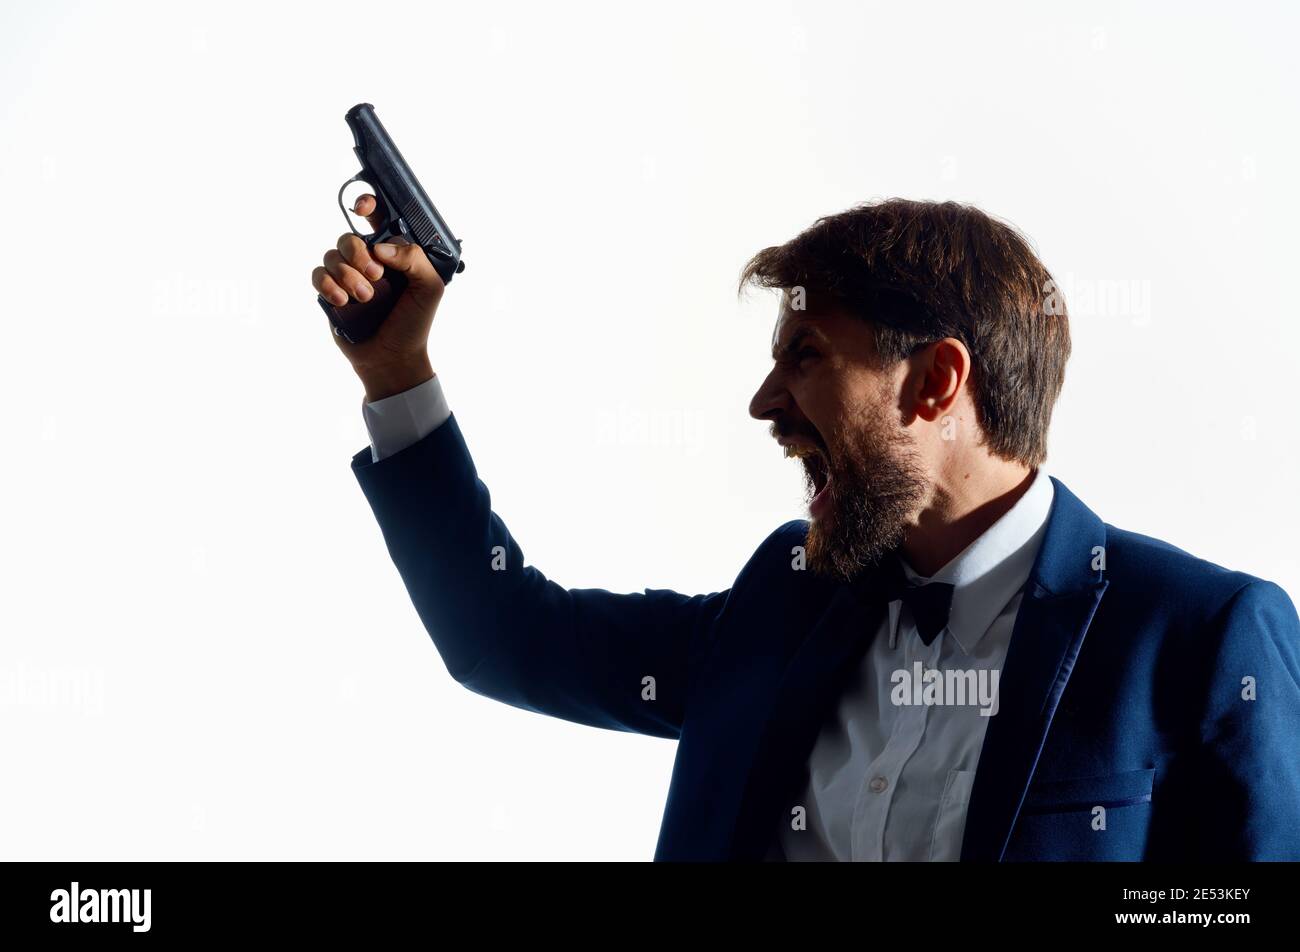 man in suit holding pistol lost his head suicide isolated background Stock Photo